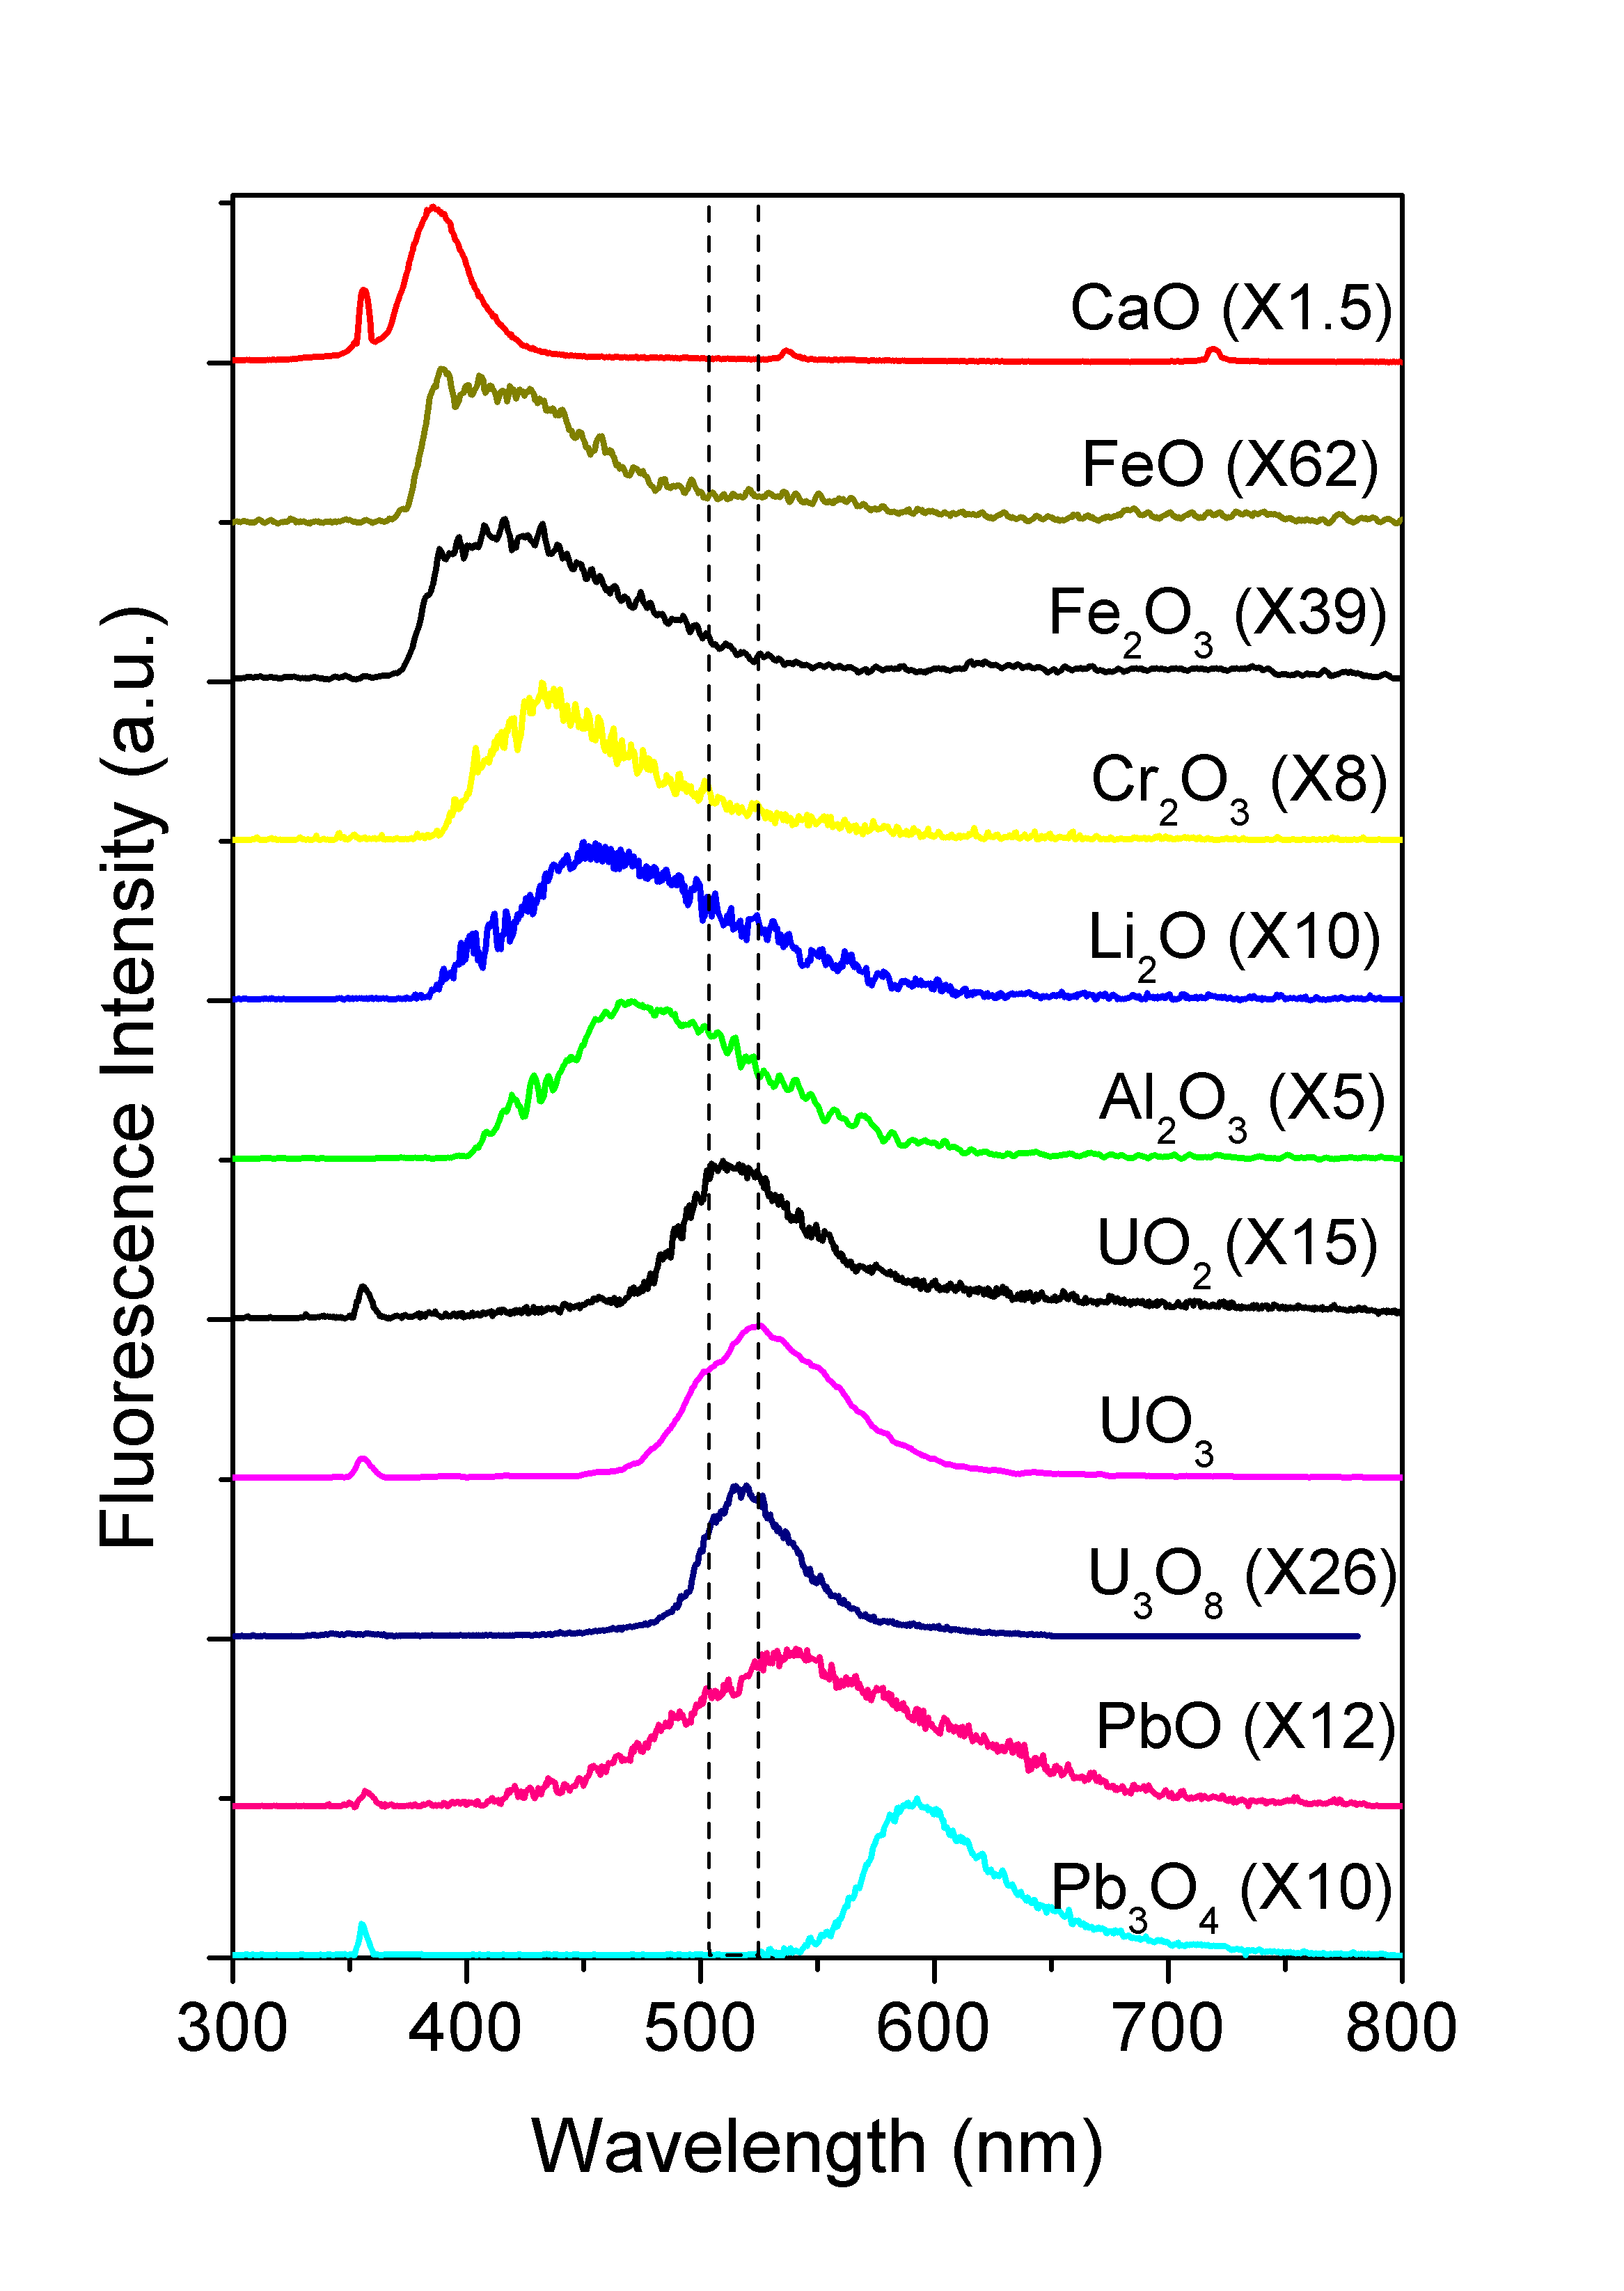 Figure 4. Fluorescence spectra of UO2, UO3, Al2O3, CaO, Cr2O3, FeO, Fe2O3, Li2O, PbO, Pb3O4 particles, and U3O8 in 5% HNO3 solvent excited by a 355 nm laser.